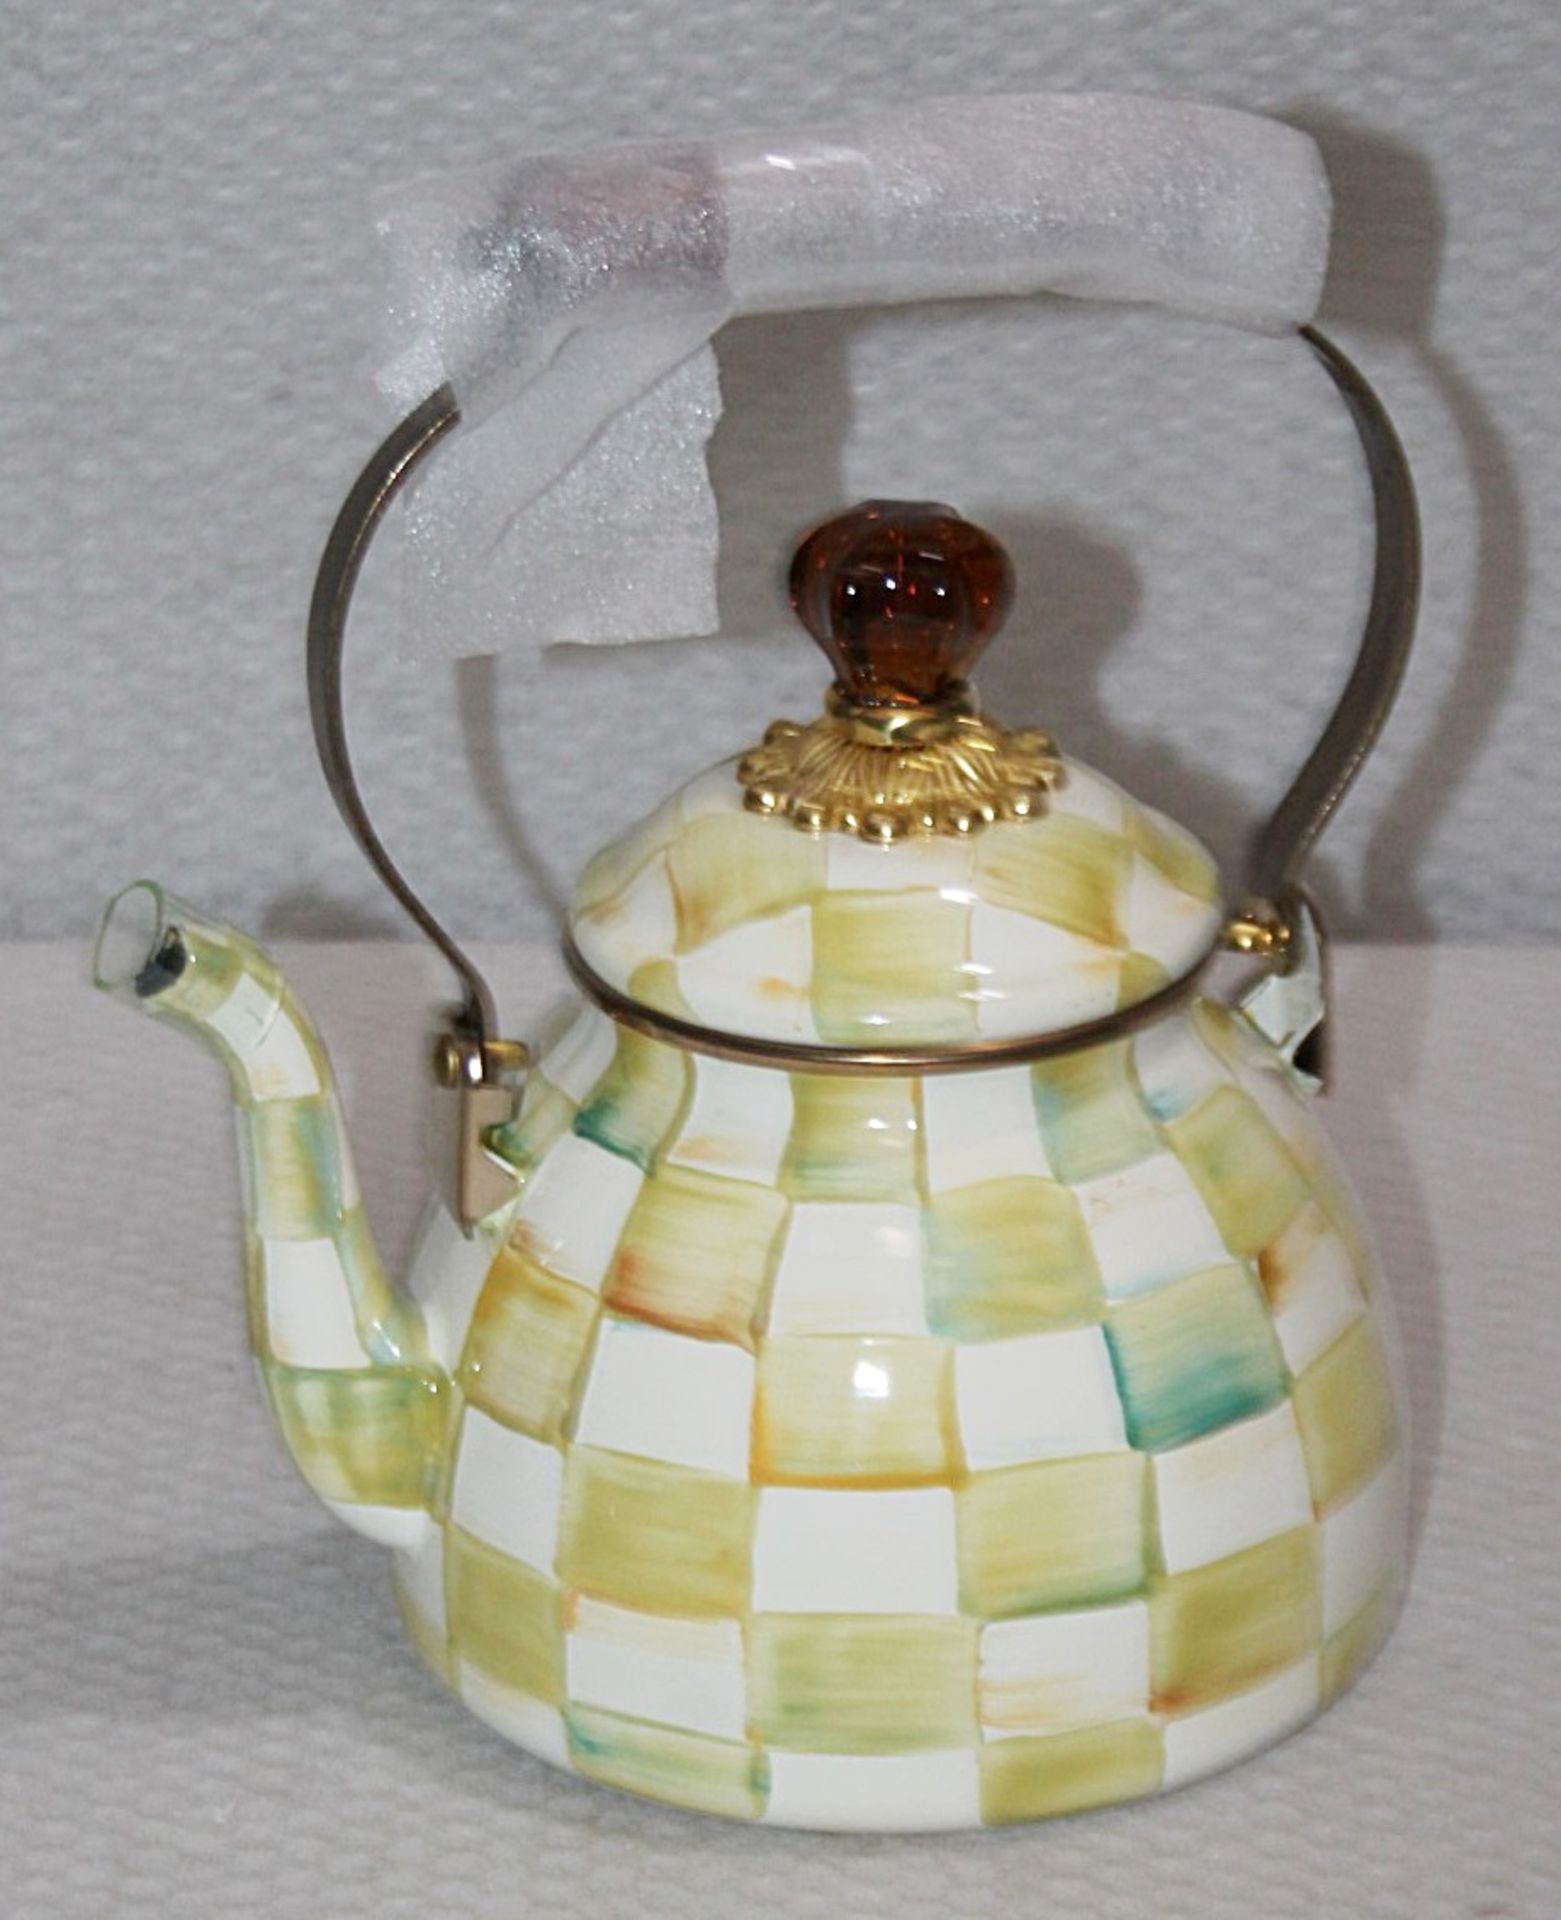 1 x MACKENZIE-CHILDS 'Parchment Check' Tea Kettle £197.00 - Unused Boxed Stock - Ref: HAS423/FEB22/ - Image 3 of 9